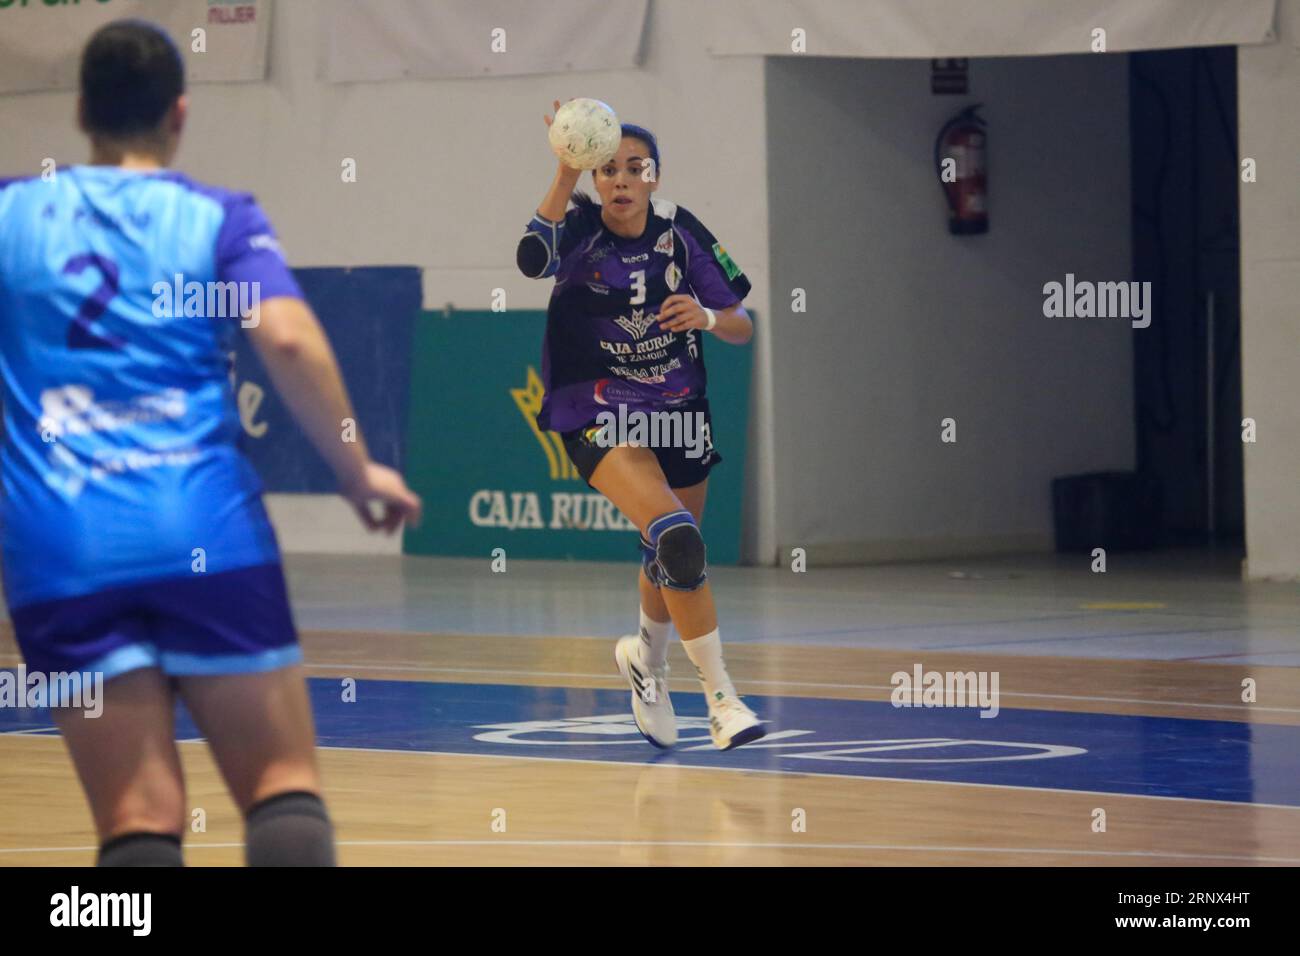 Oviedo, Spain, 02nd September, 2023: The player of Caja Rural Aula Valladolid, Jimena Lago (3) dribbles the ball during the first day of the Liga Guerreras Iberdrola between Lobas Global Atac Oviedo and Caja Rural Aula Valladolid, on 02 September 2023, at the Florida Arena Municipal Sports Center, in Oviedo, Spain. Credit: Alberto Brevers / Alamy Live News. Stock Photo